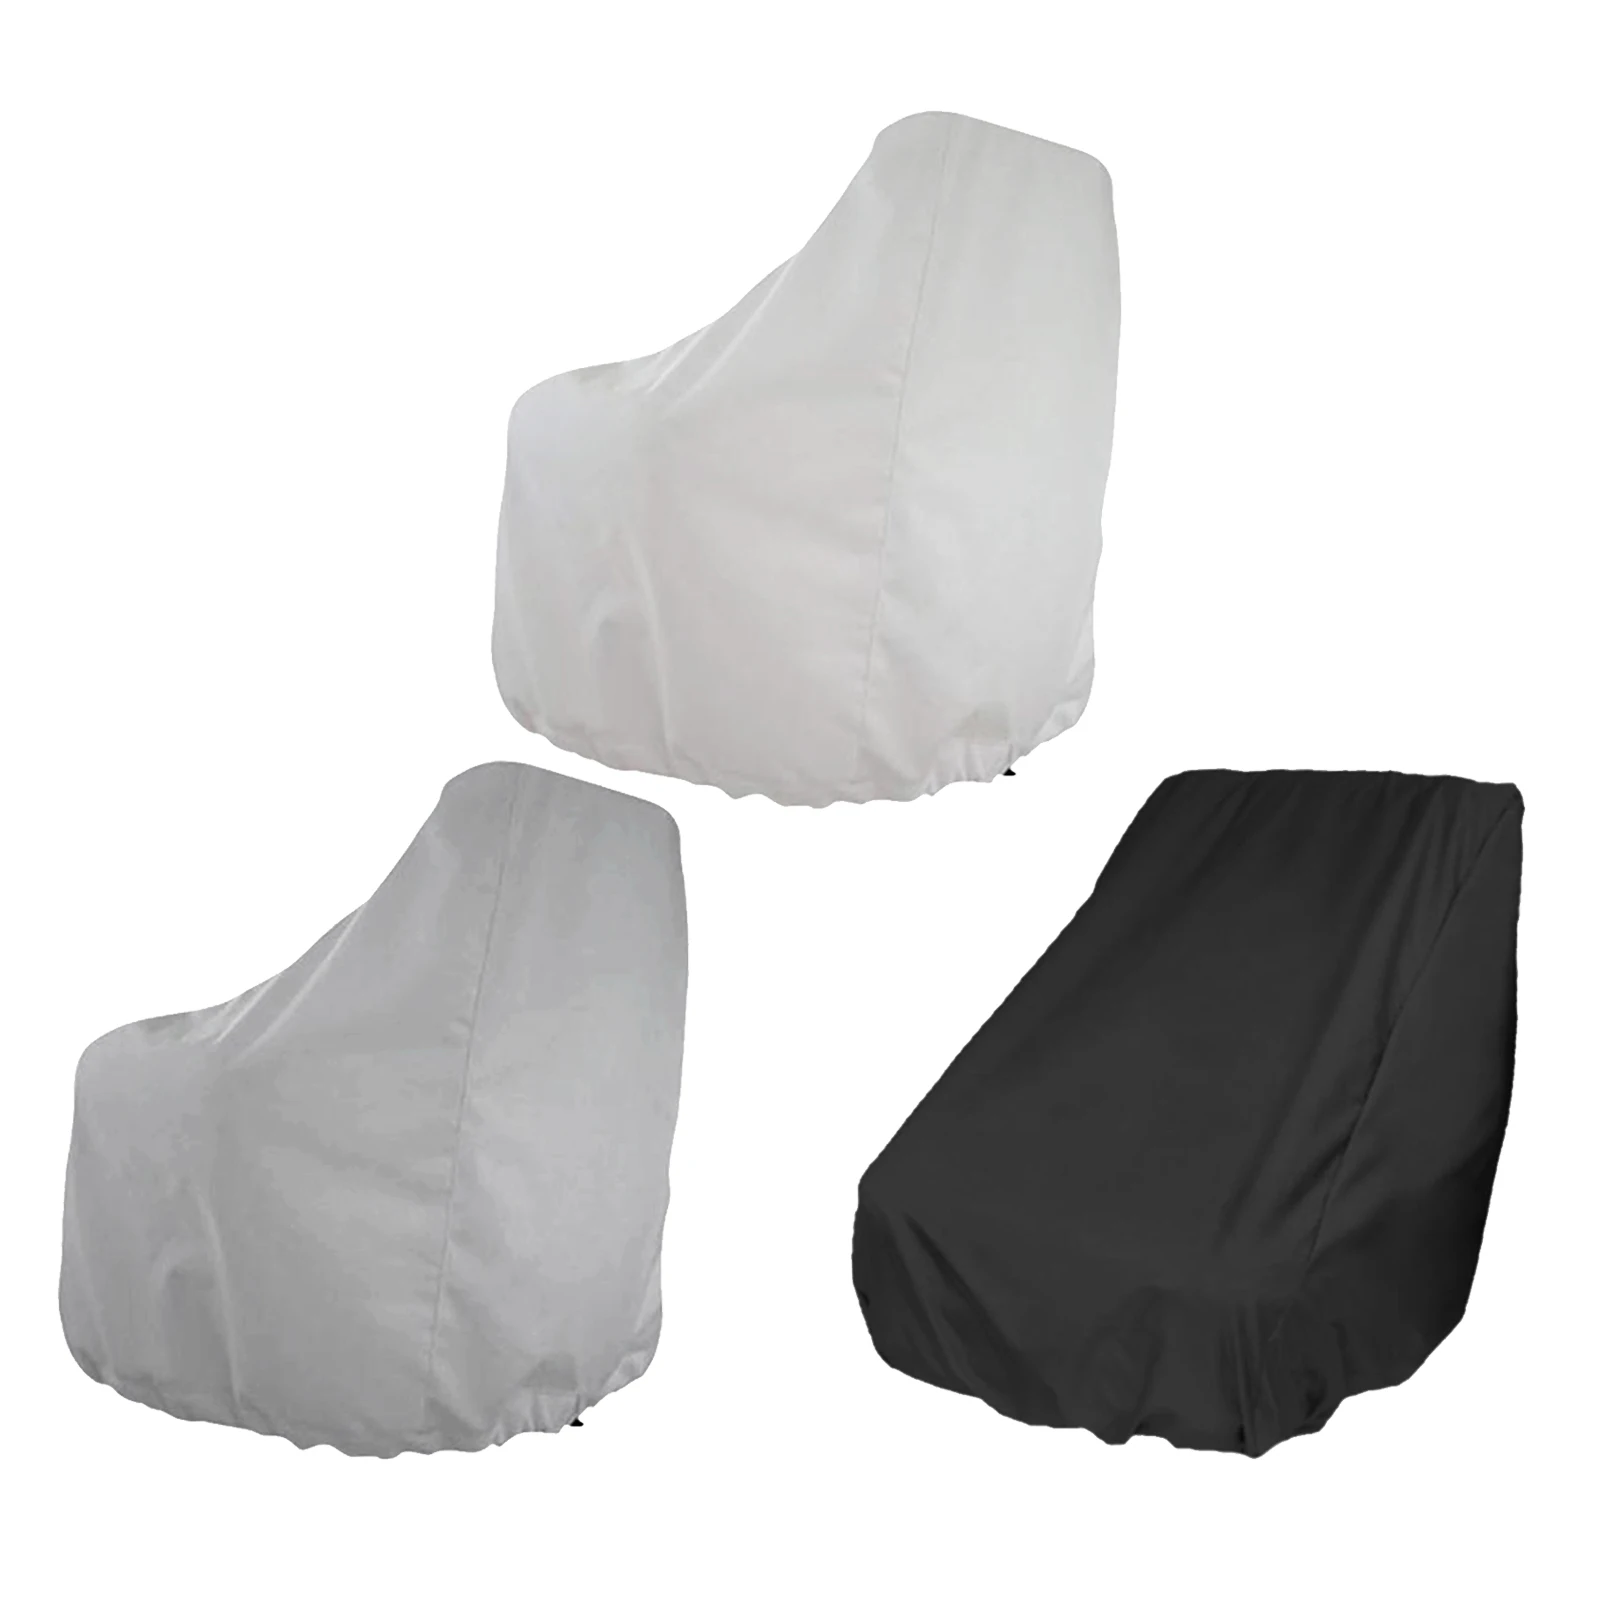 Durable Yacht Seat Covers High Quality Seat Cover 210D Oxford Cloth Protects Outdoor Chair from Dust Anti-UV Covers